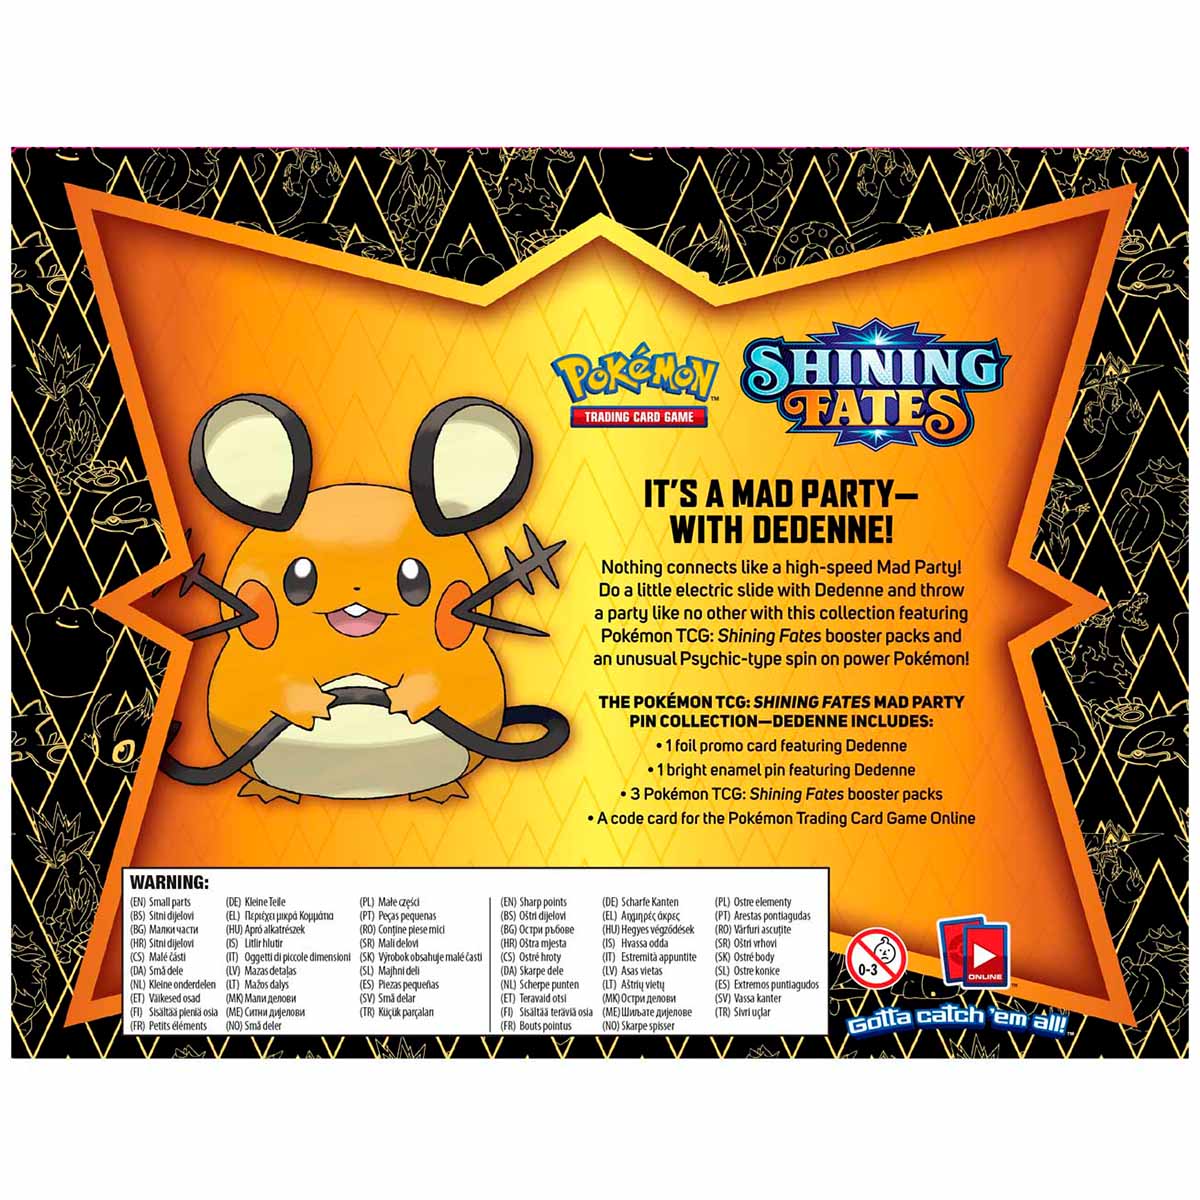 Pokémon - Shining Fates Mad Party Pin Collection - Dedenne